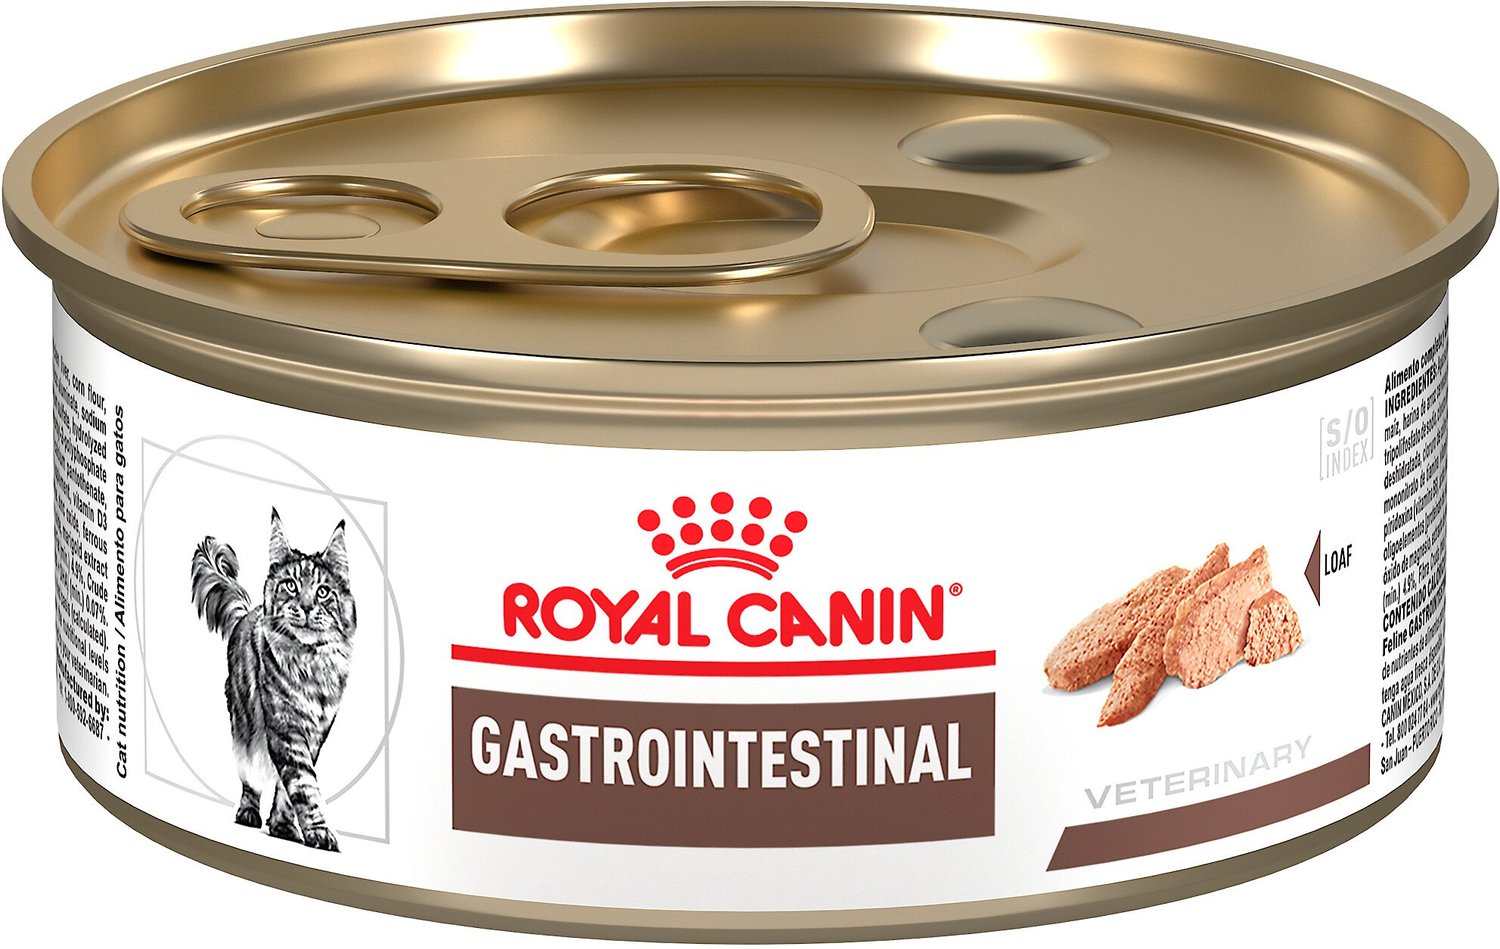 ROYAL CANIN VETERINARY DIET Gastrointestinal High Energy Canned Cat